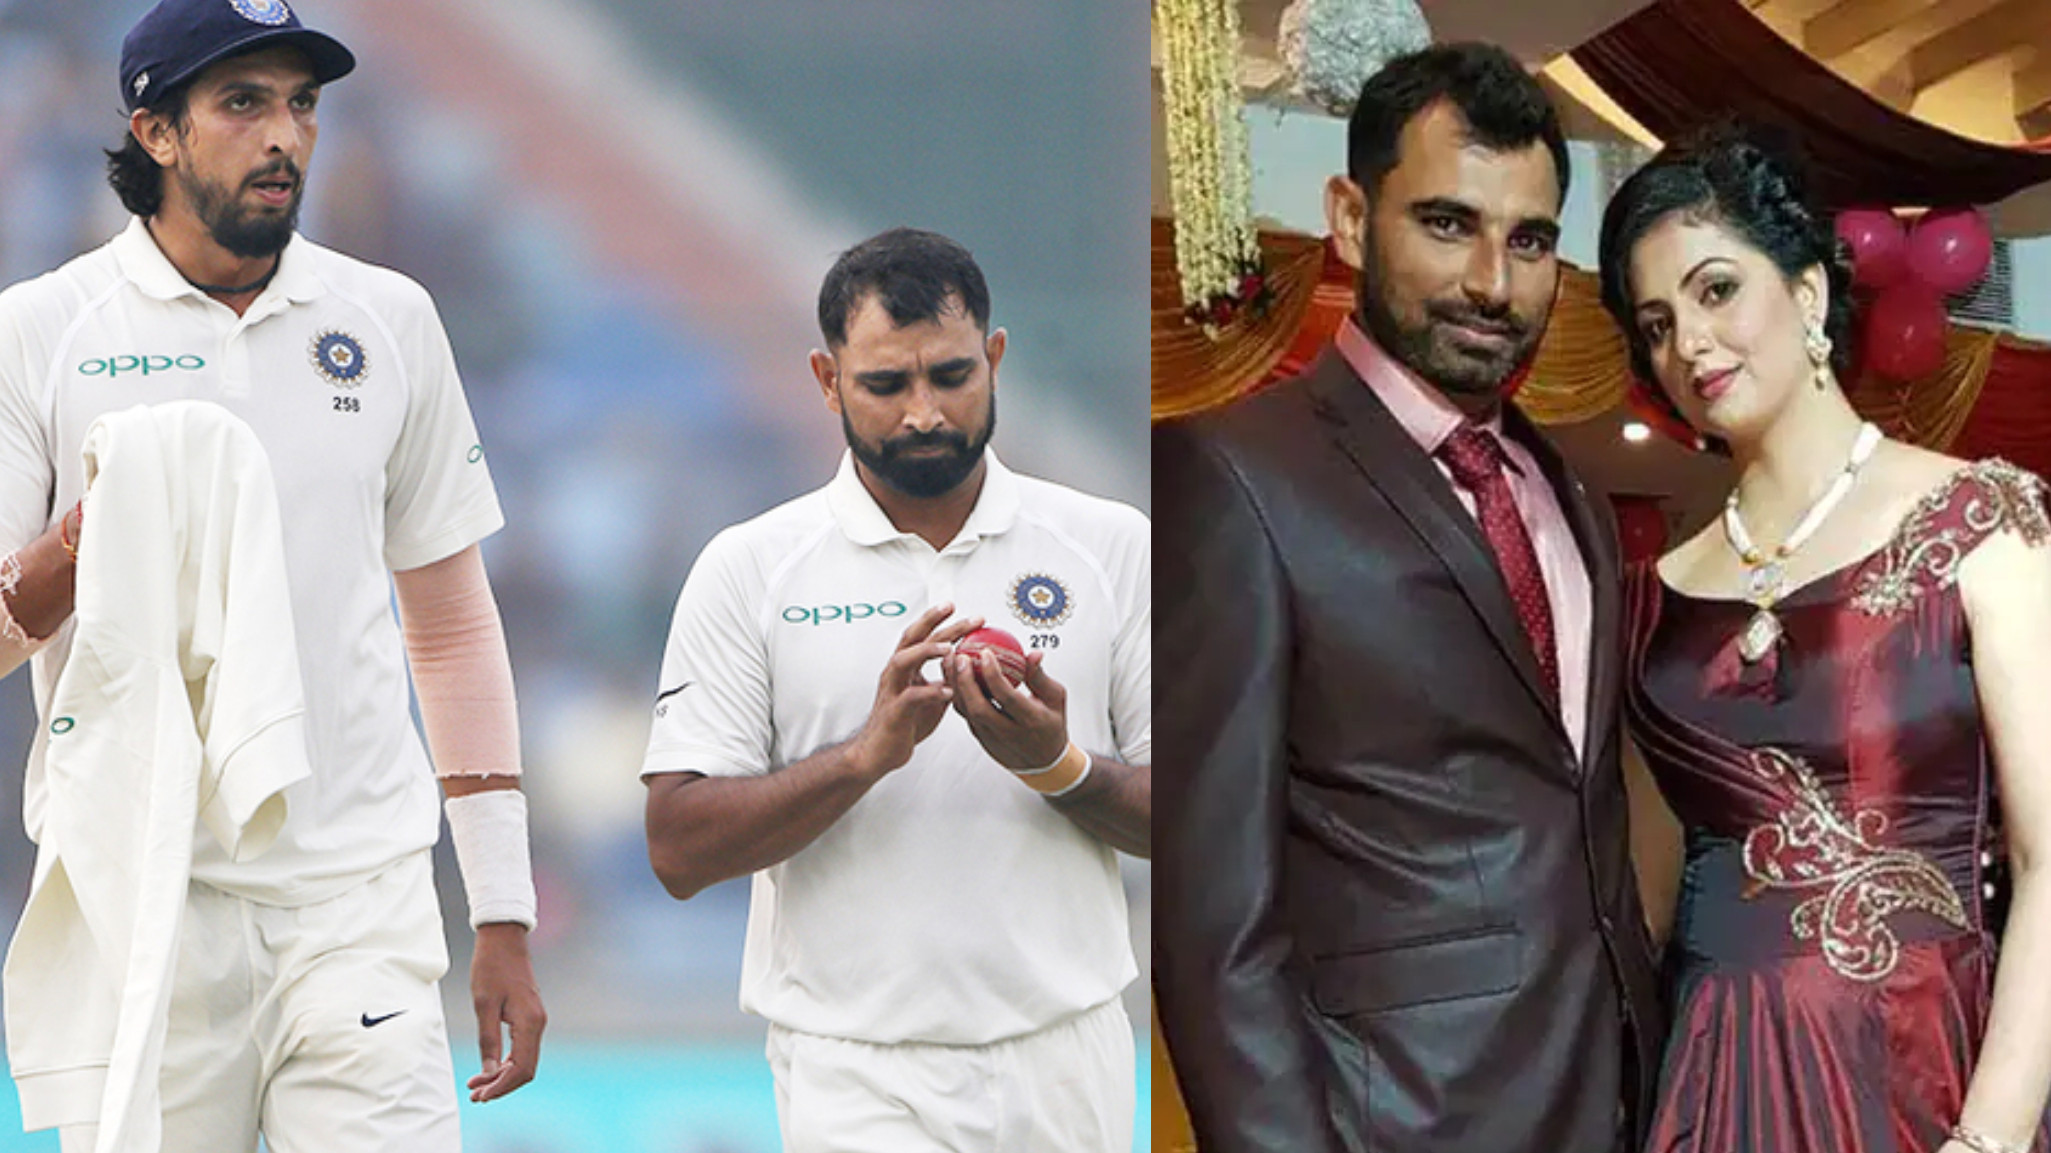 “I'm 200% sure he can't do that”- Ishant Sharma on BCCI ACU investigating Mohammad Shami on his wife’s match-fixing allegations